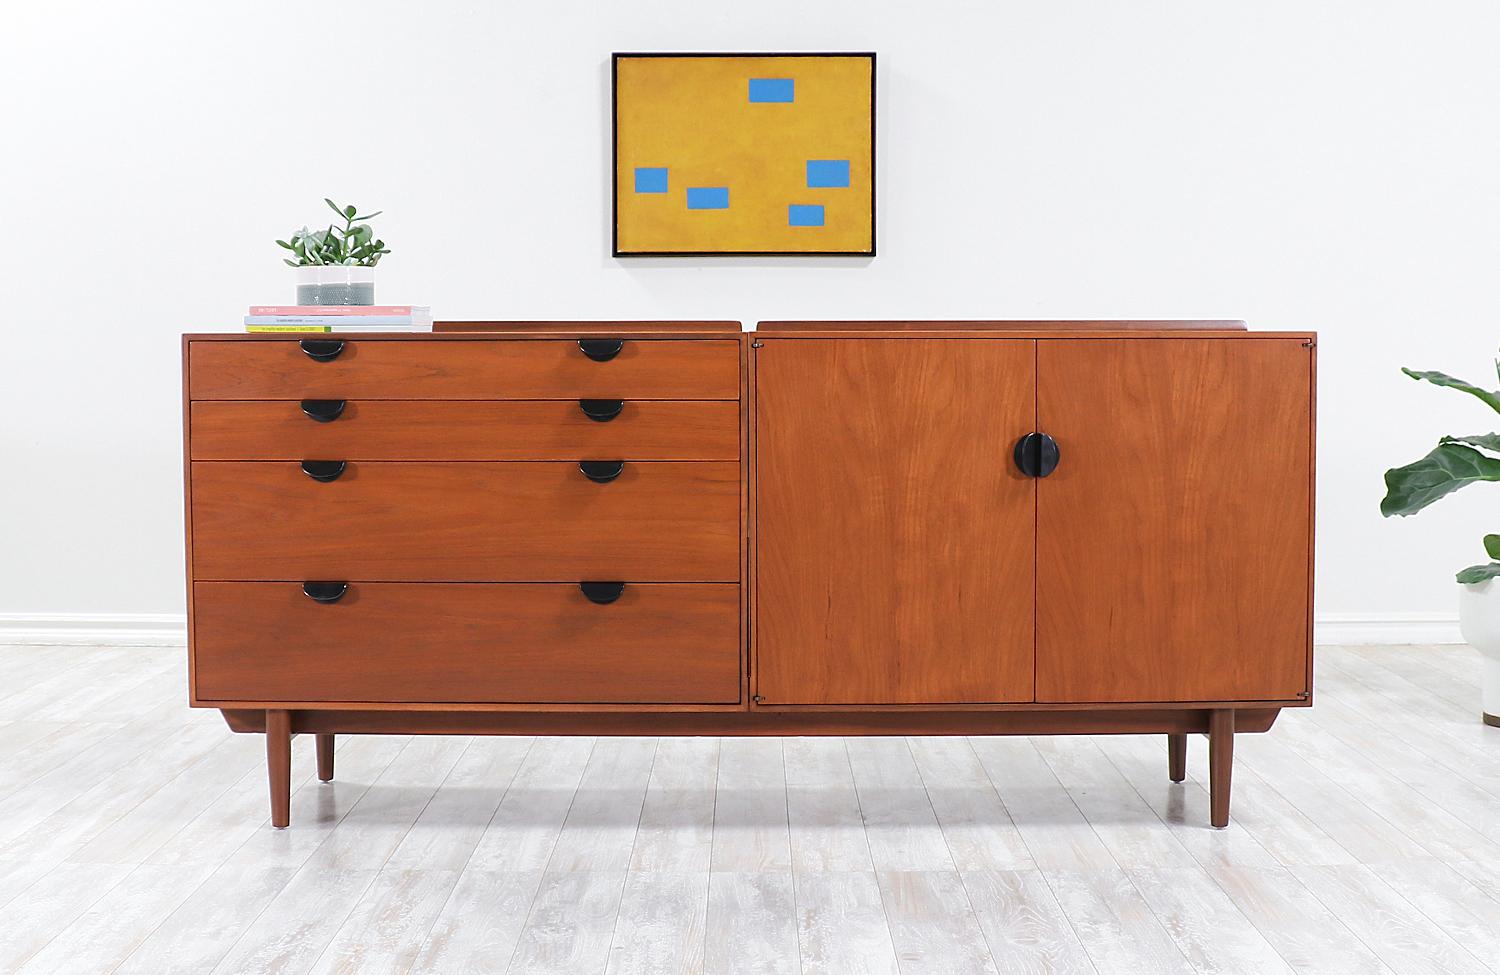 Spectacular model 23-22 credenza designed by distinguished Danish architect Finn Juhl in collaboration with the famous American manufacturing company, Baker Furniture during the 1950s. As part of their line called 